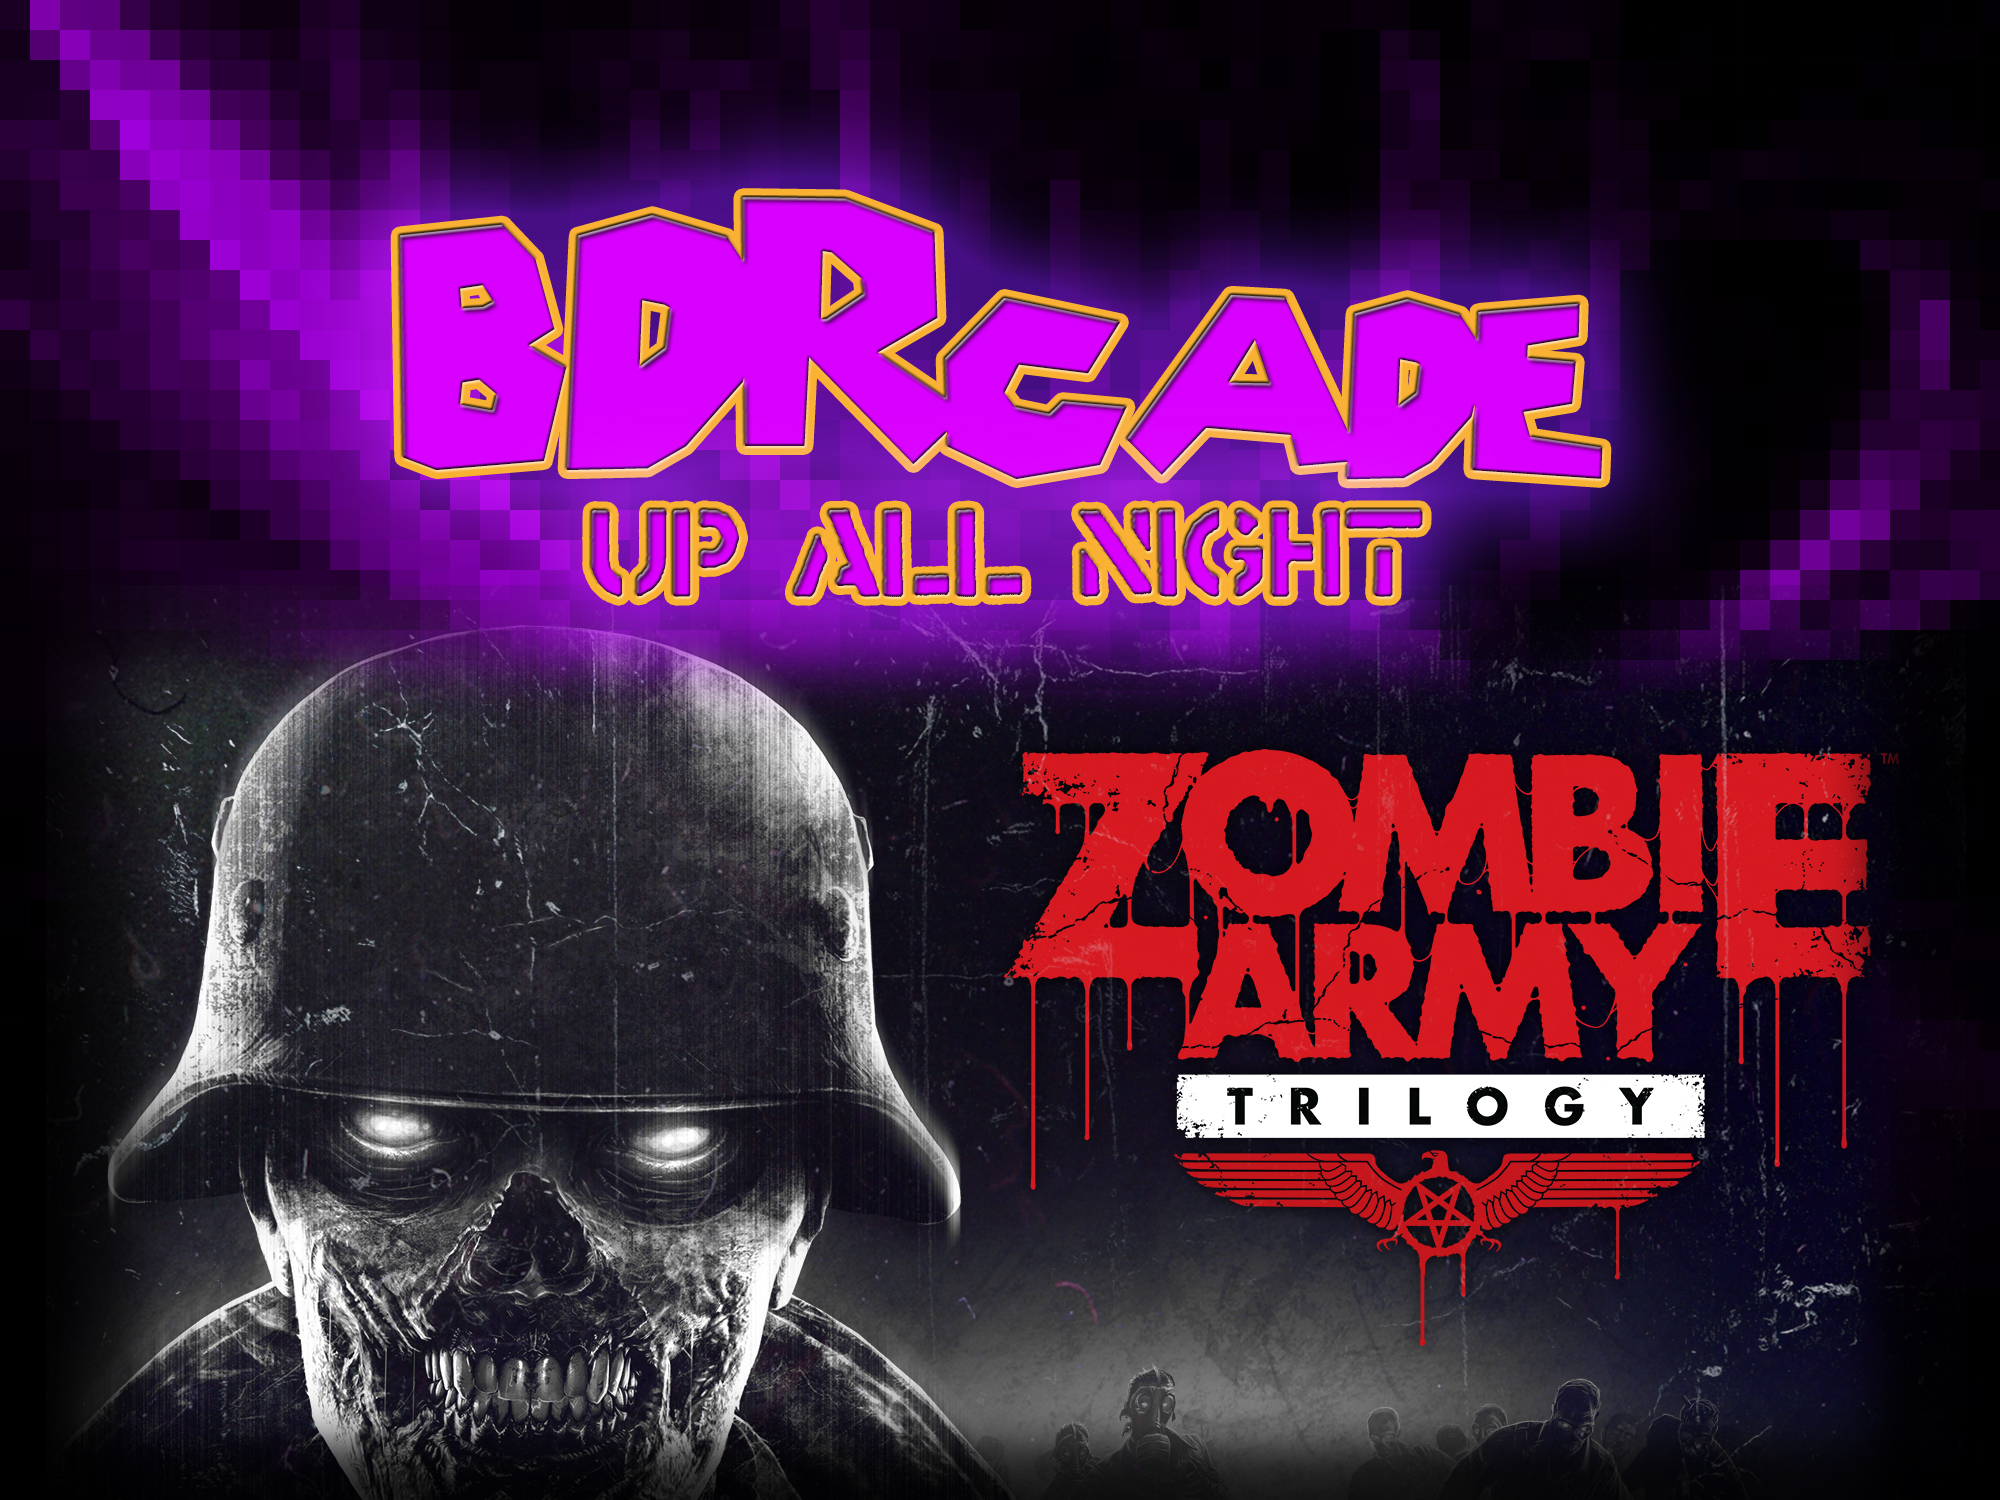 Zombie Army Trilogy – Up All Night – BDRcade